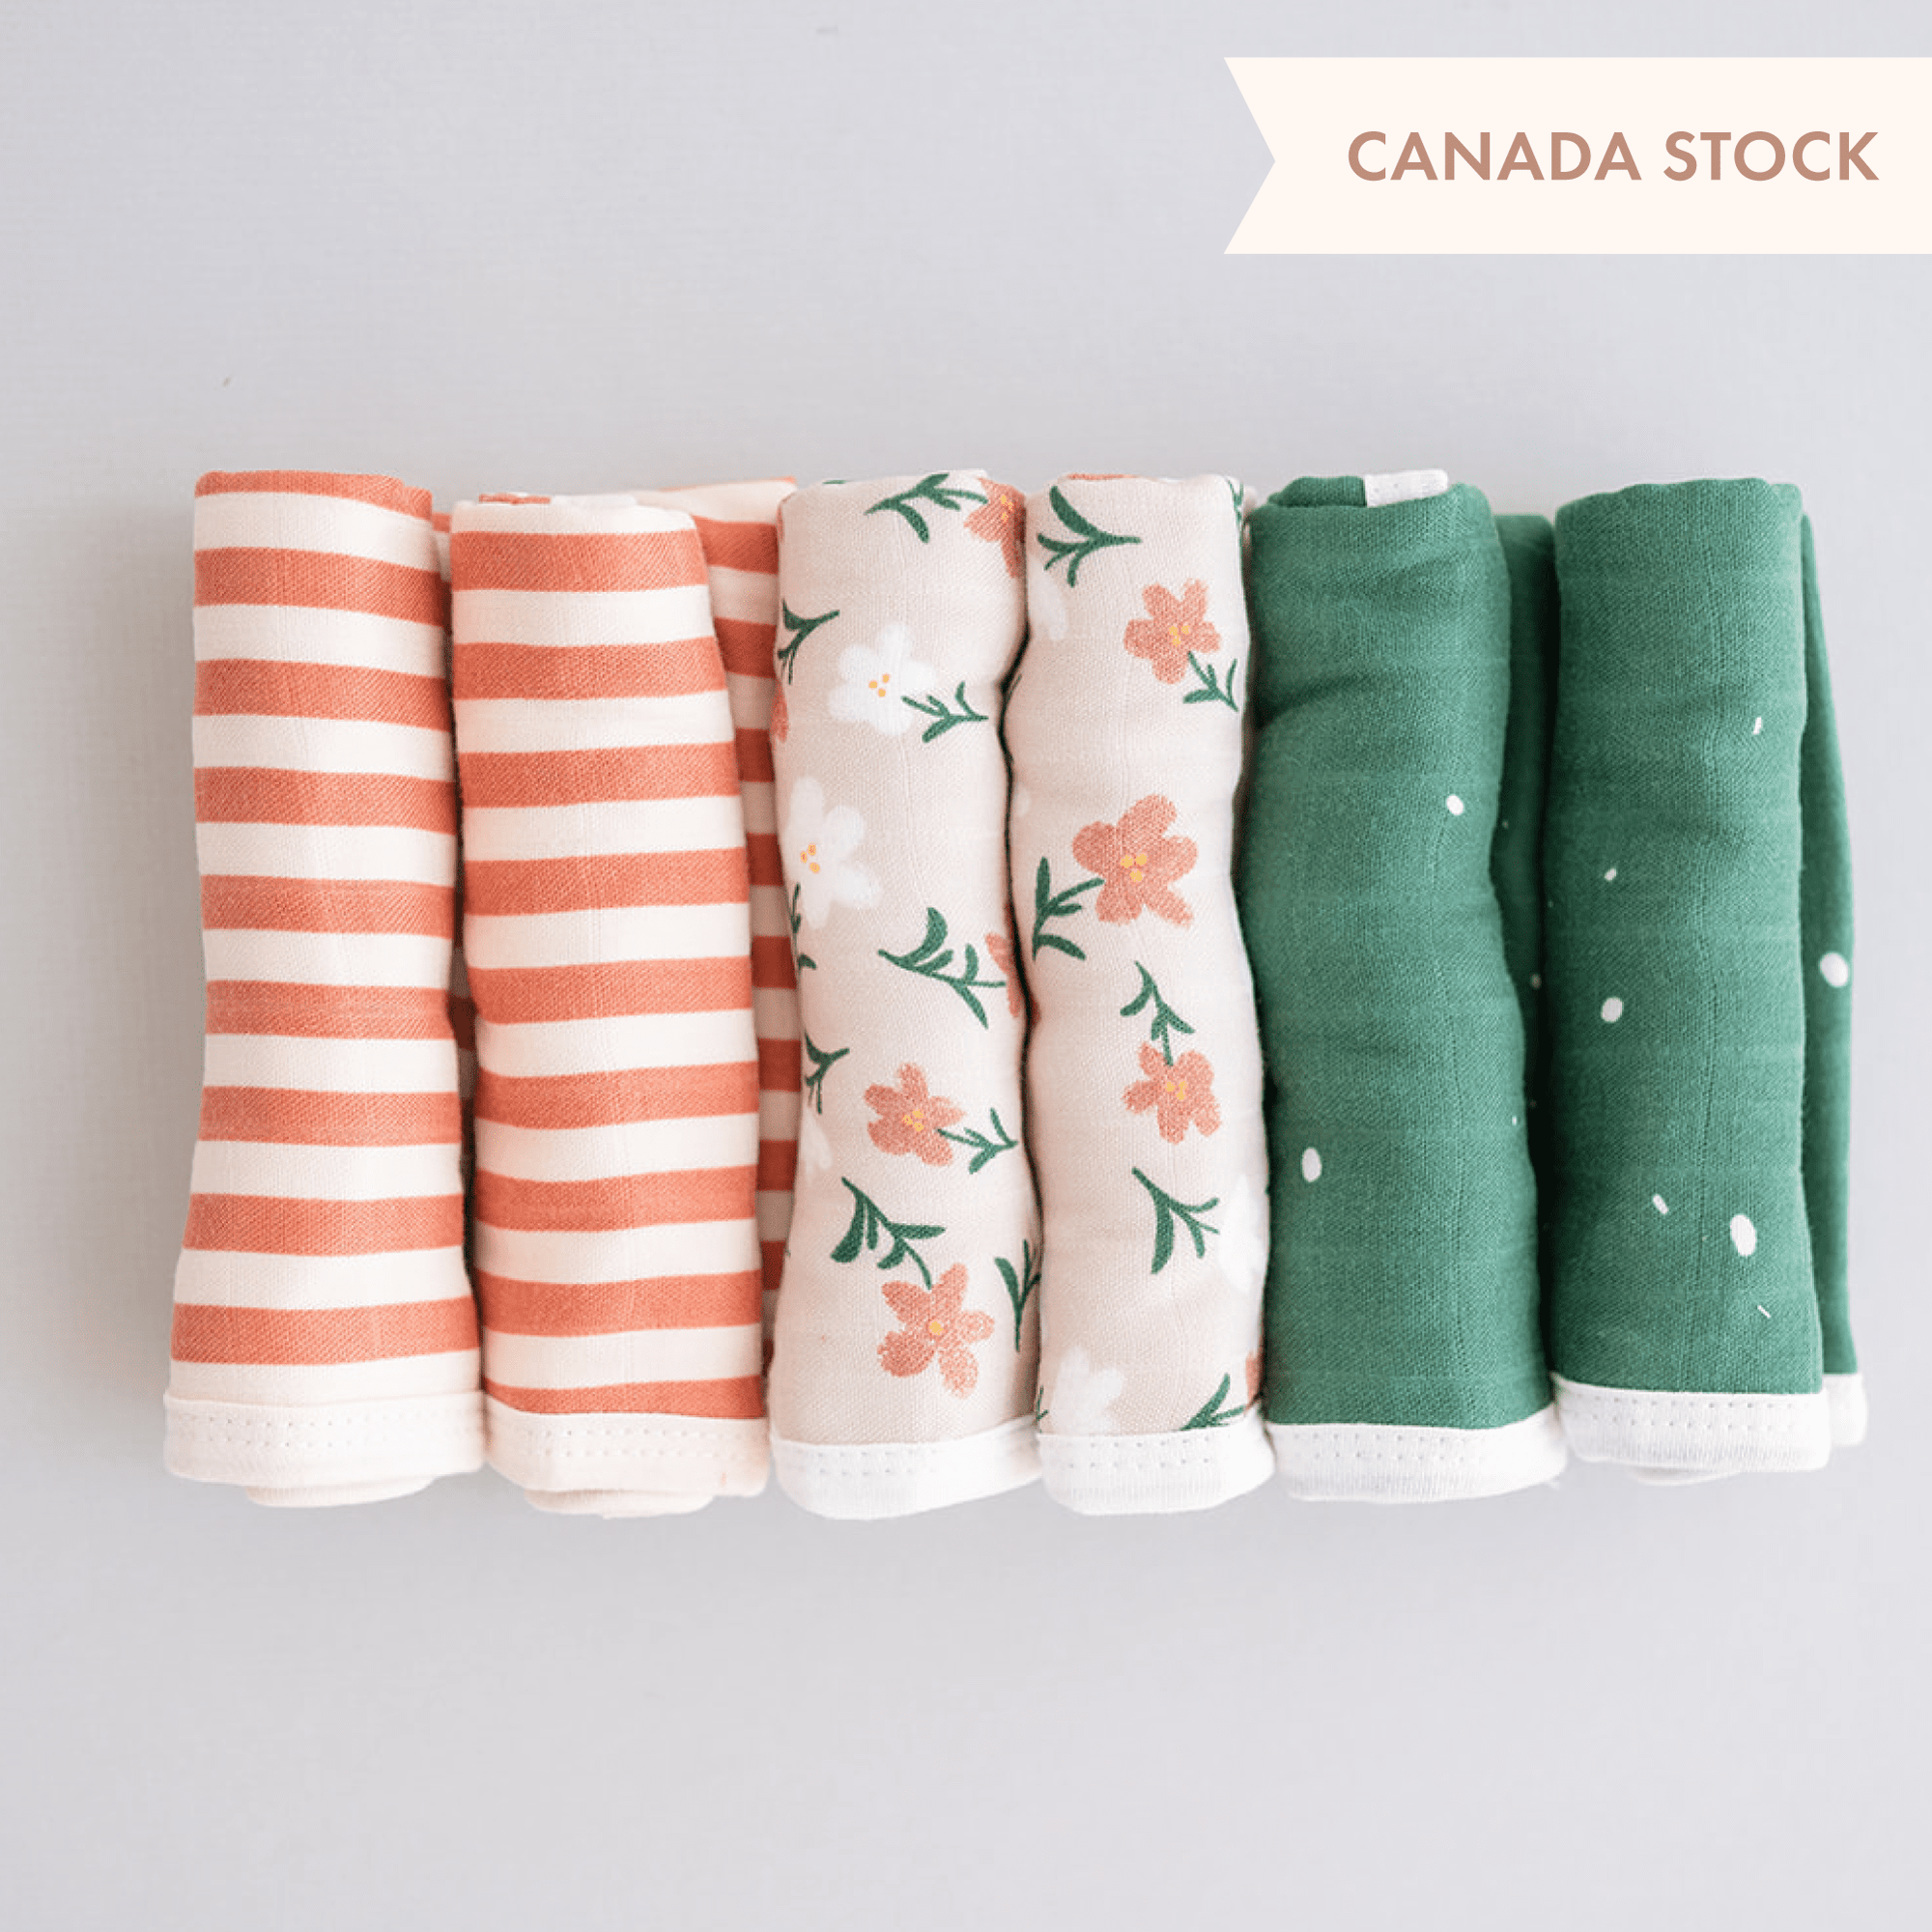 https://cdn.shopify.com/s/files/1/0129/5846/6105/products/starryfloralstripes_washcloths_Canada_2000x.png?v=1663771802